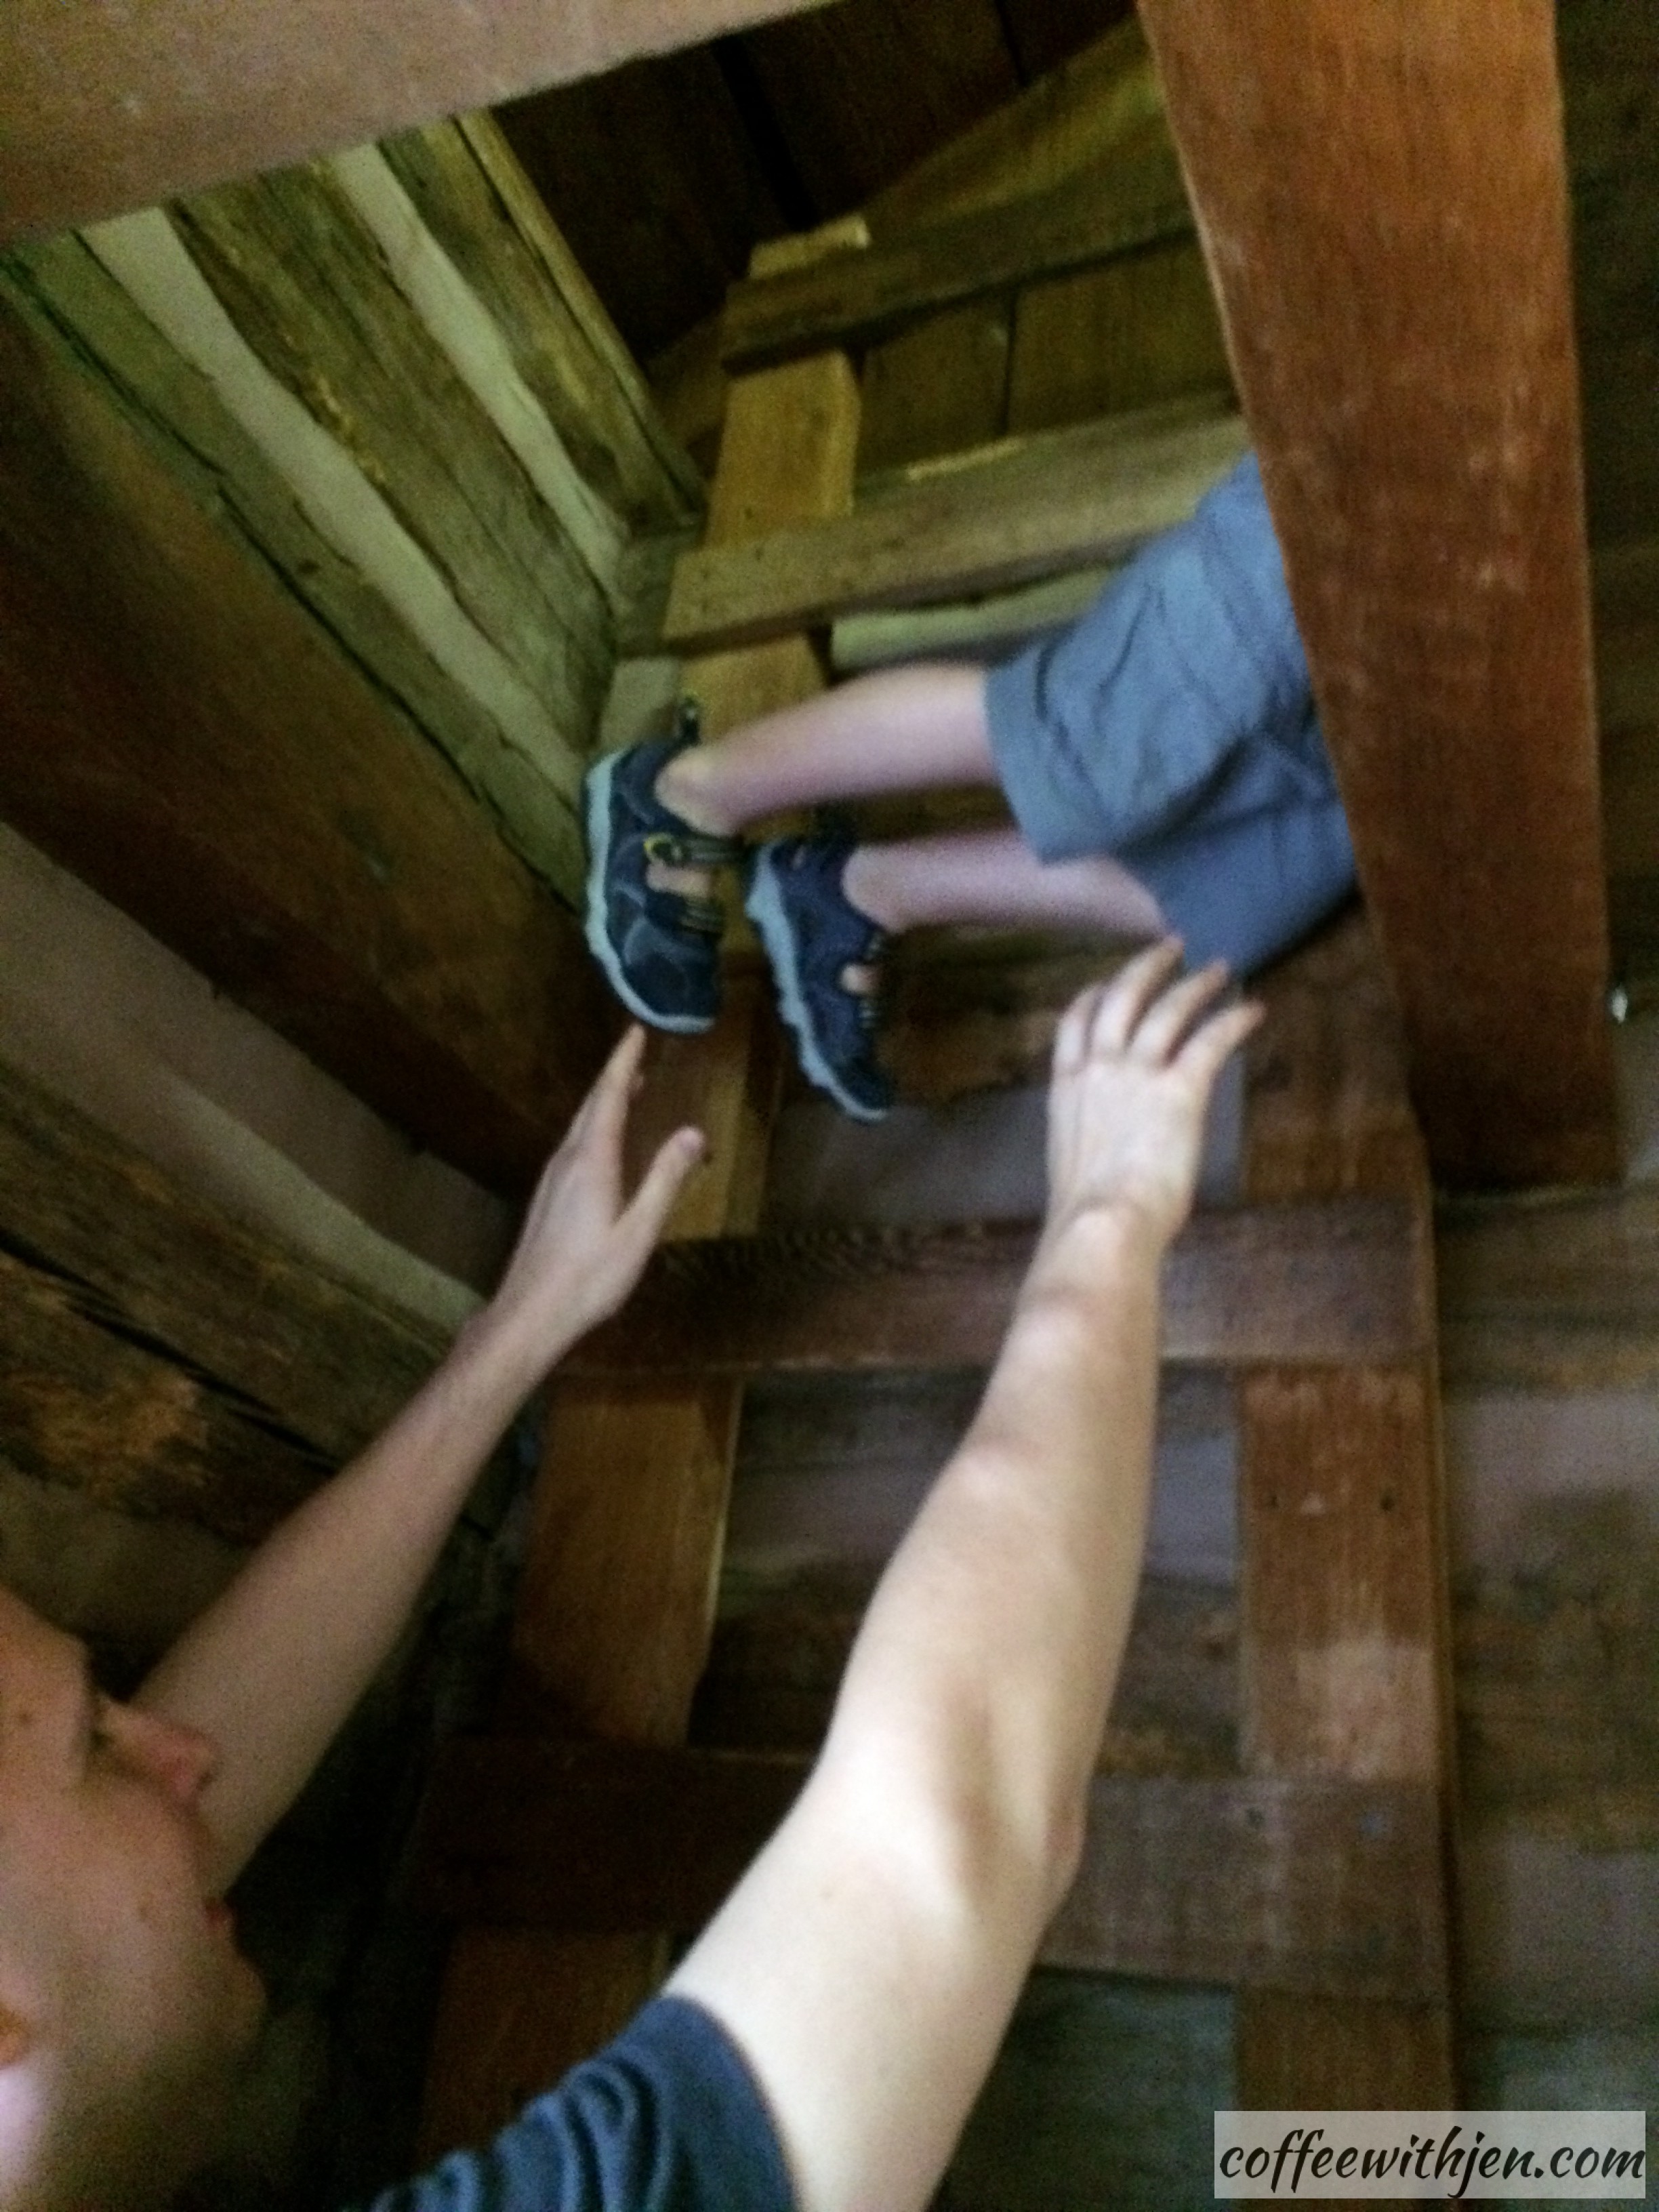 The Kids' Zone- They even got to climb up into the loft like Mary and Laura!  